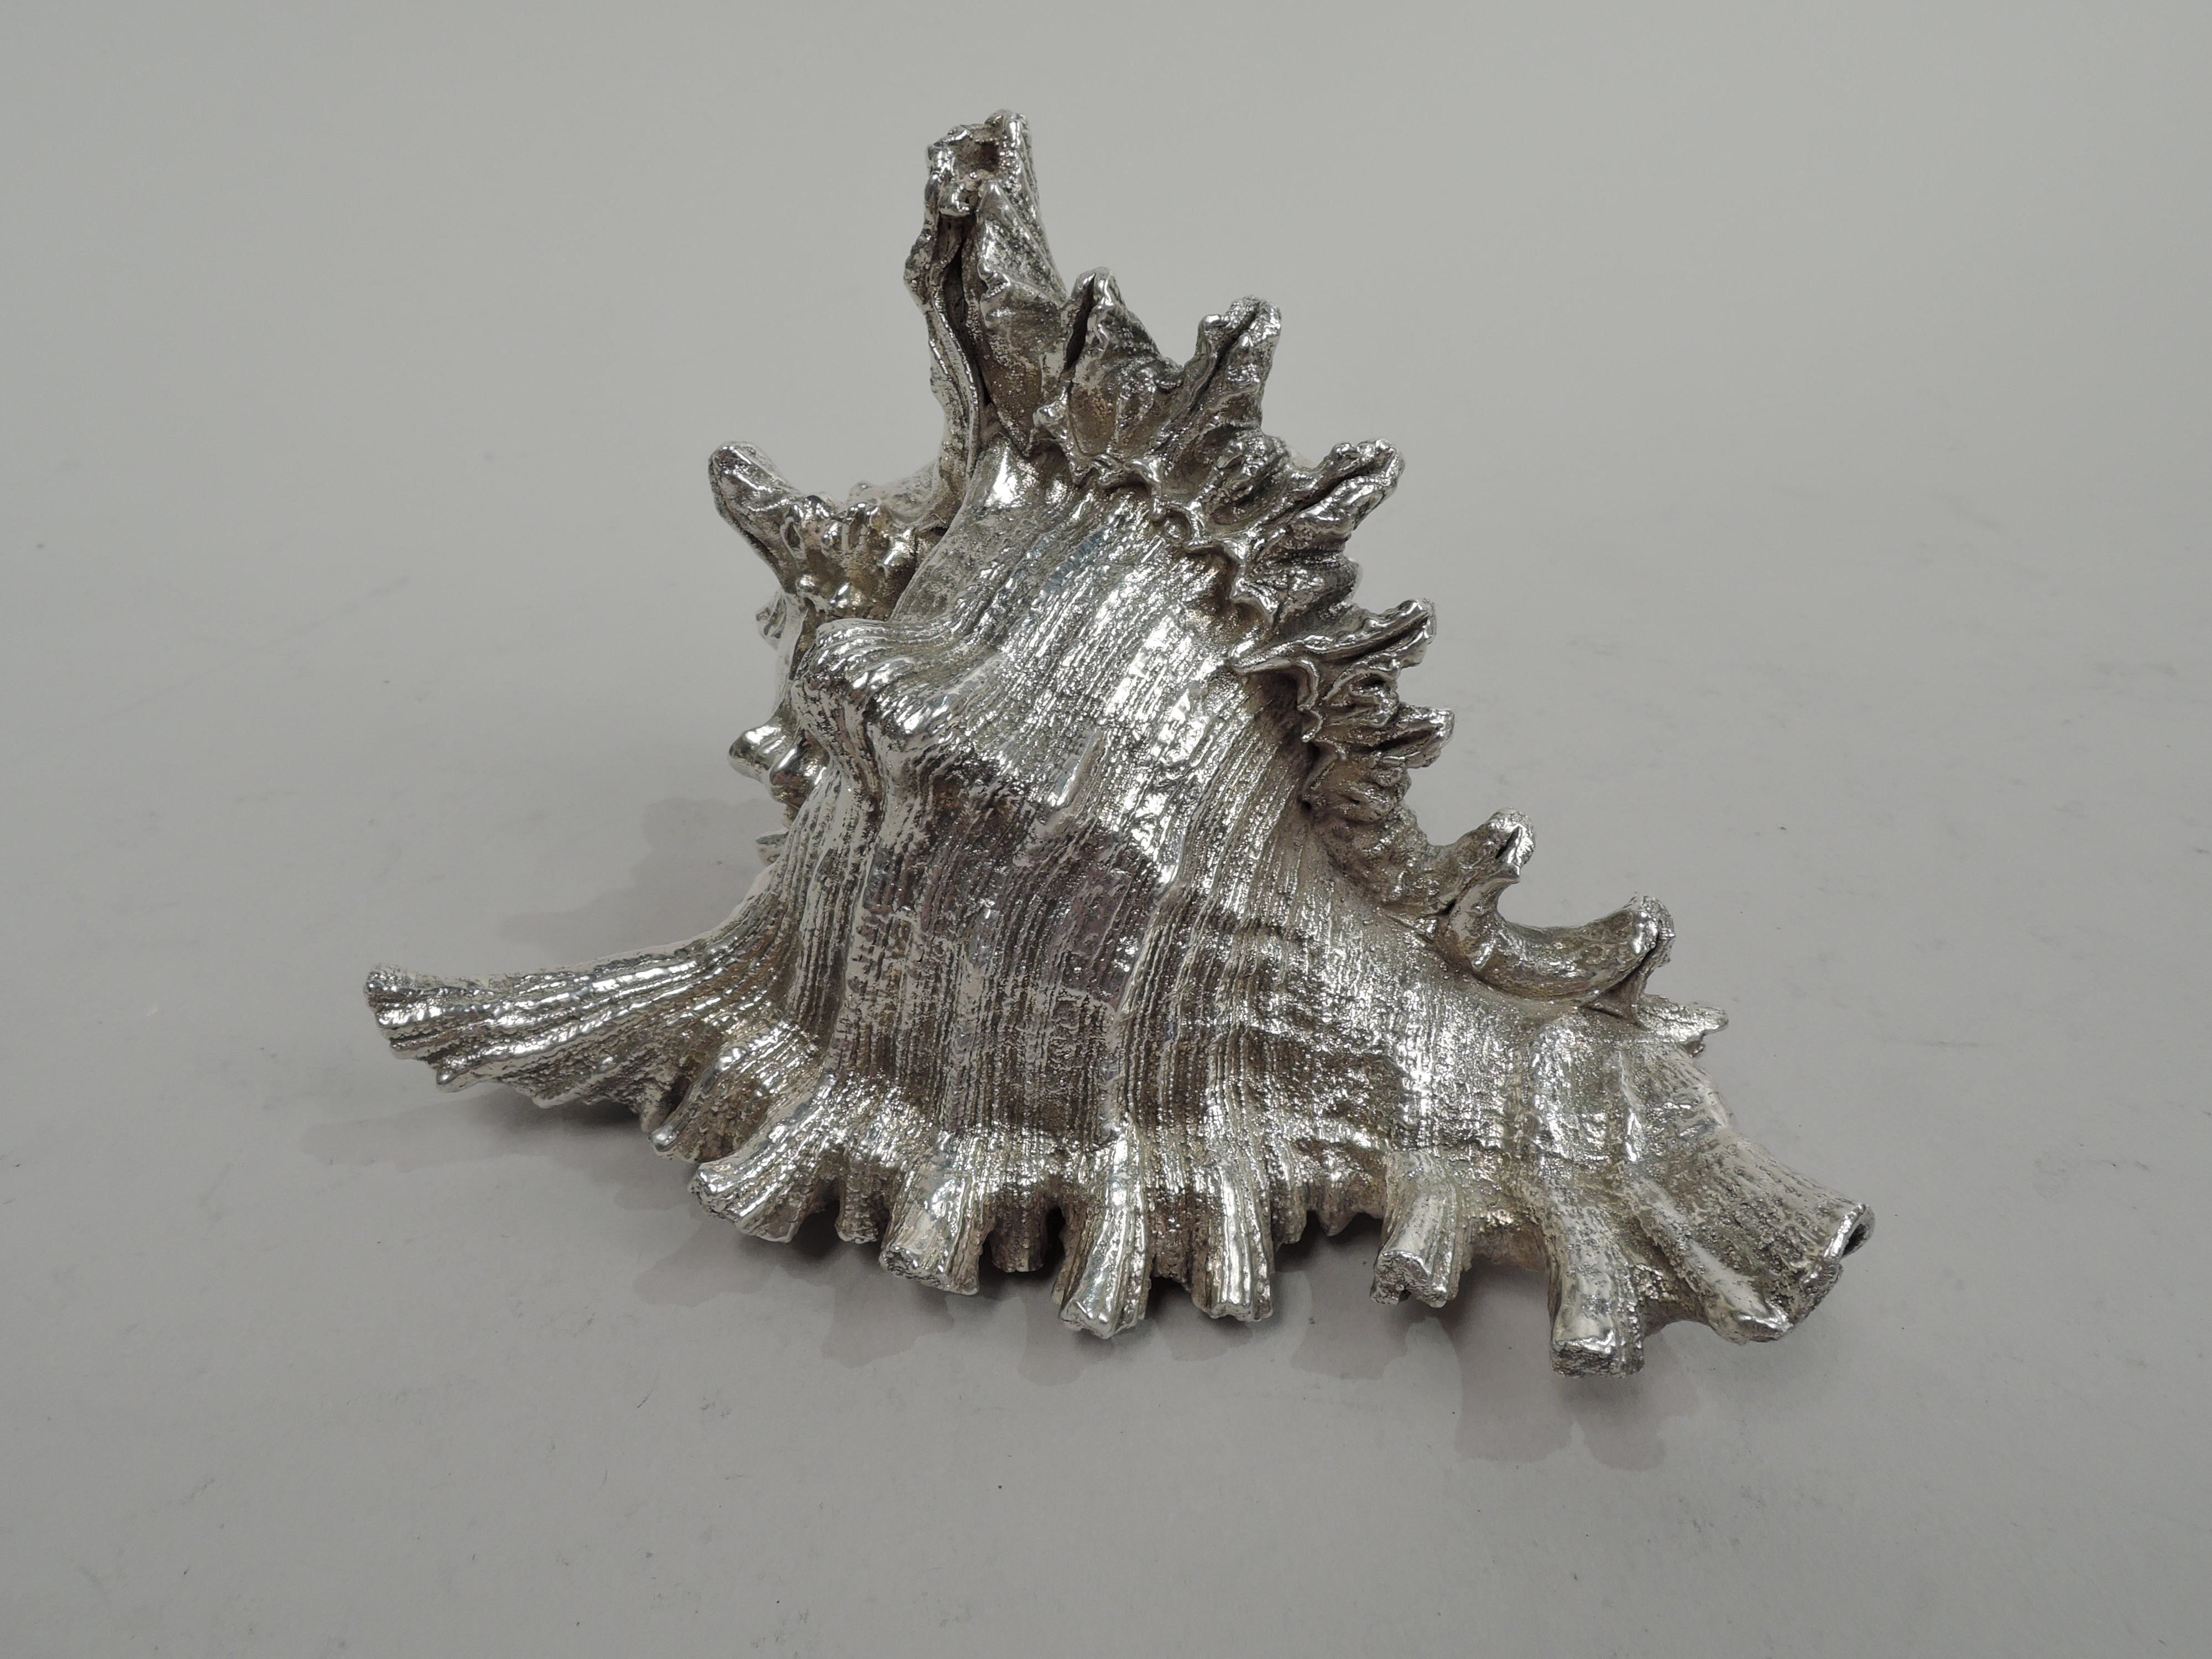 Italian silver cast figural seashell. Spiky, irregular, and striated conch, suggestive of a sea-tossed journey. Shell-lined interior. Marked “Federico Buccellati”, “999”, and post-1967 Italian mark. Gross weight: 9 troy ounces.